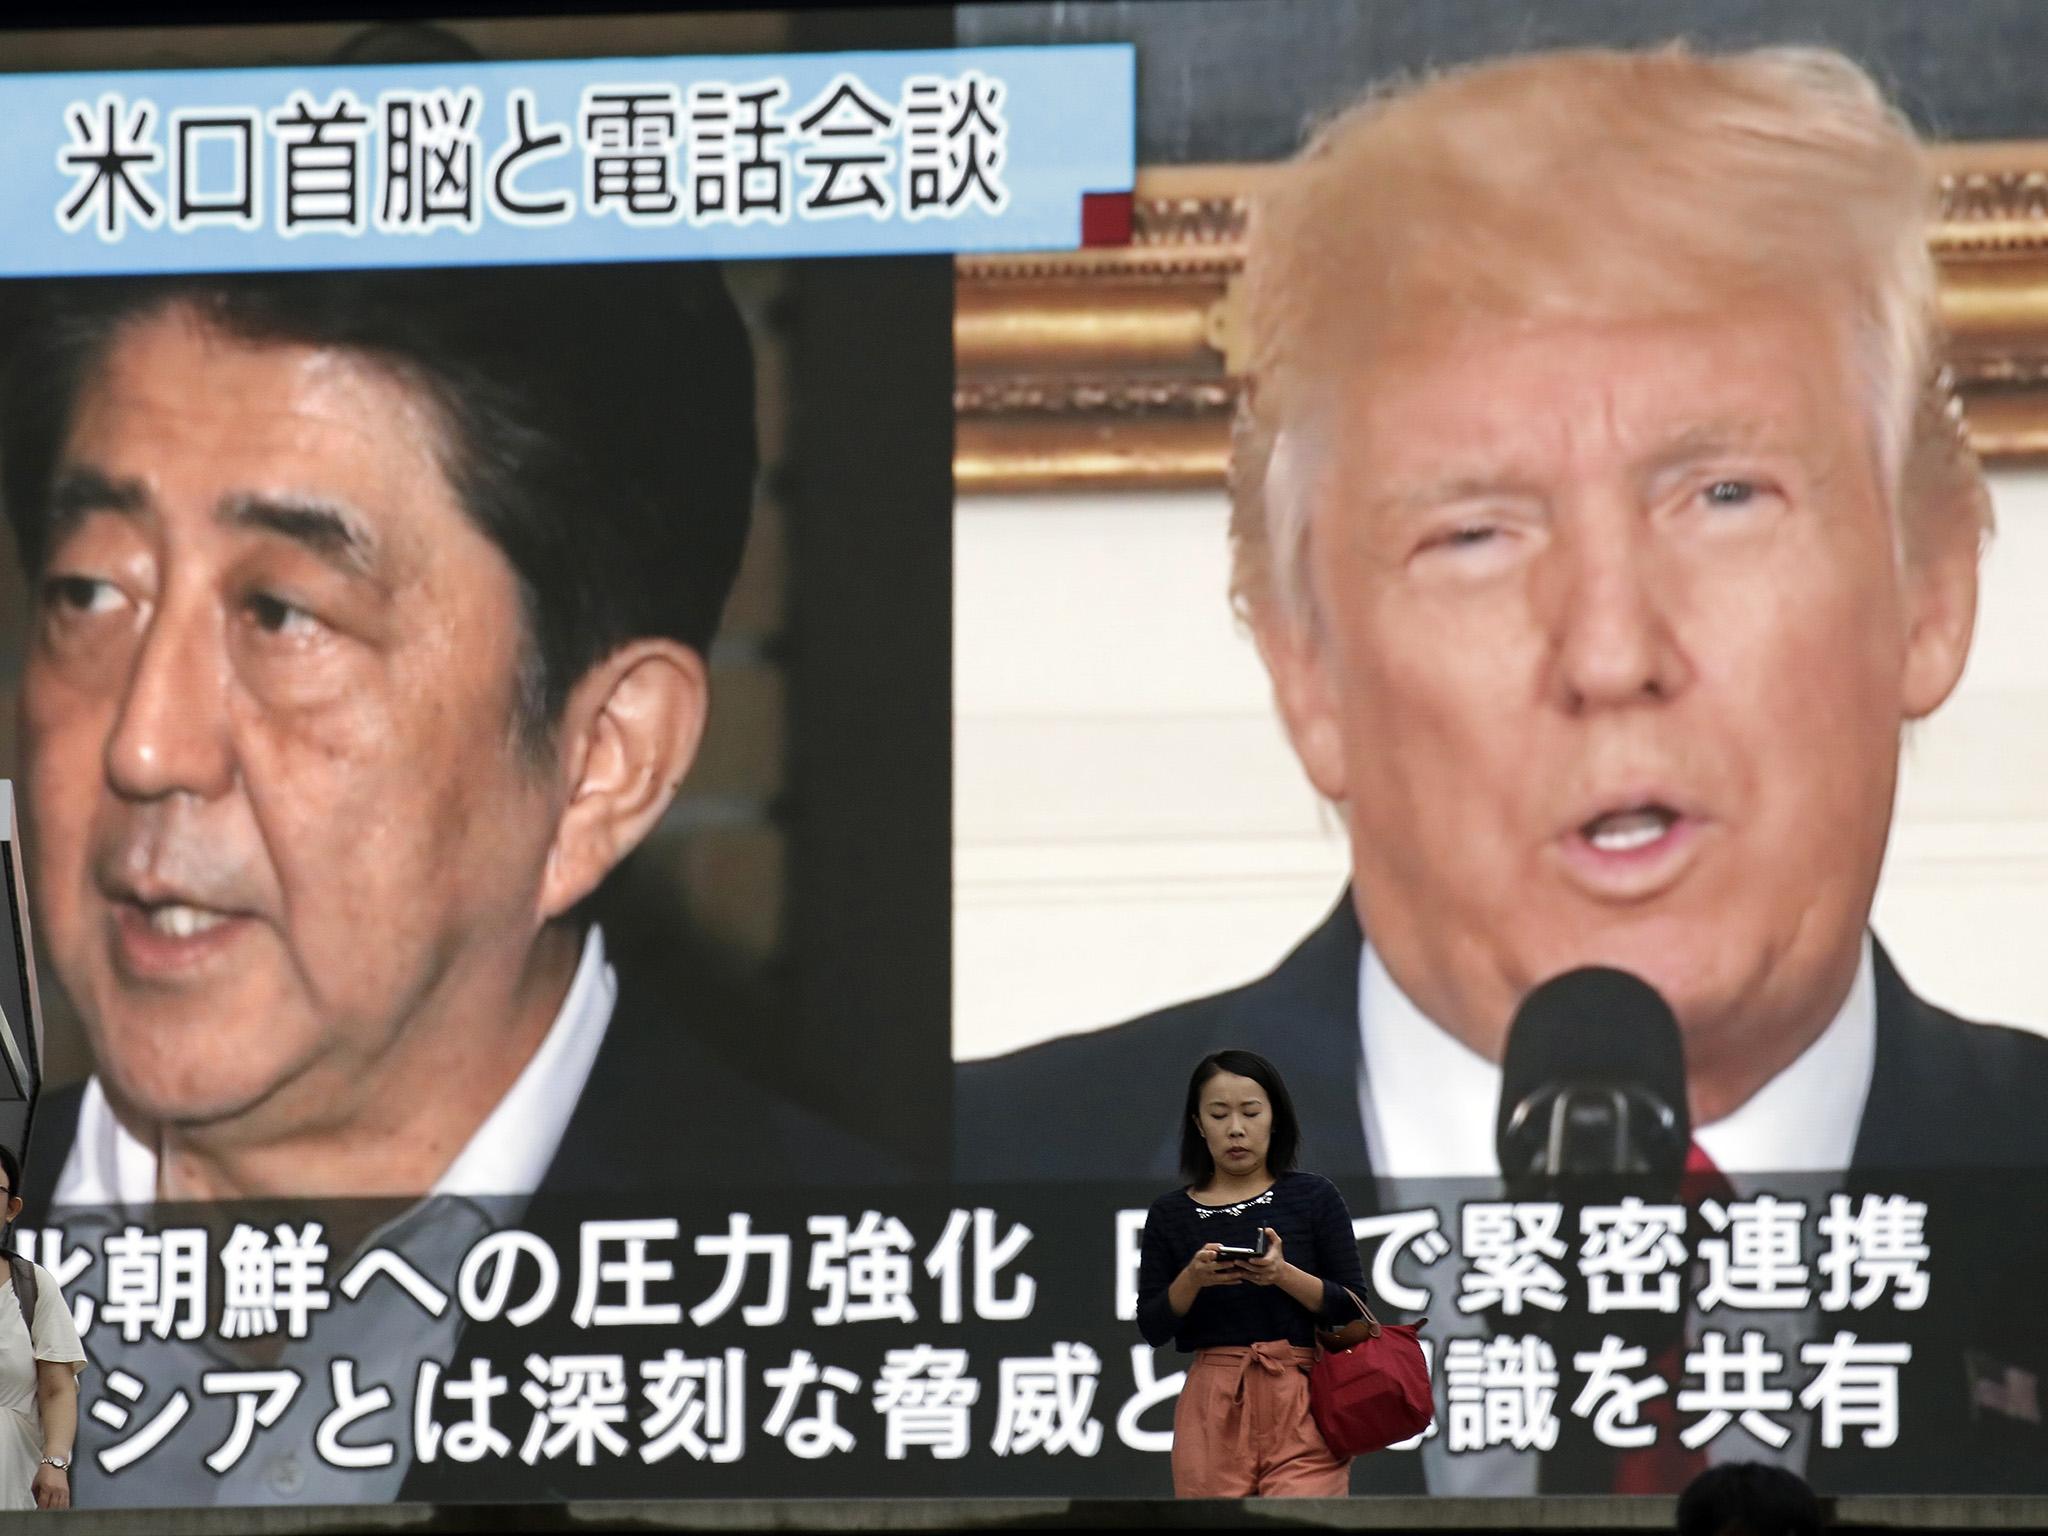 People walk by a TV news program showing the images of Japanese Prime Minister Shinzo Abe, left, and U.S. President Donald Trump while reporting North Korea's nuclear test, in Tokyo